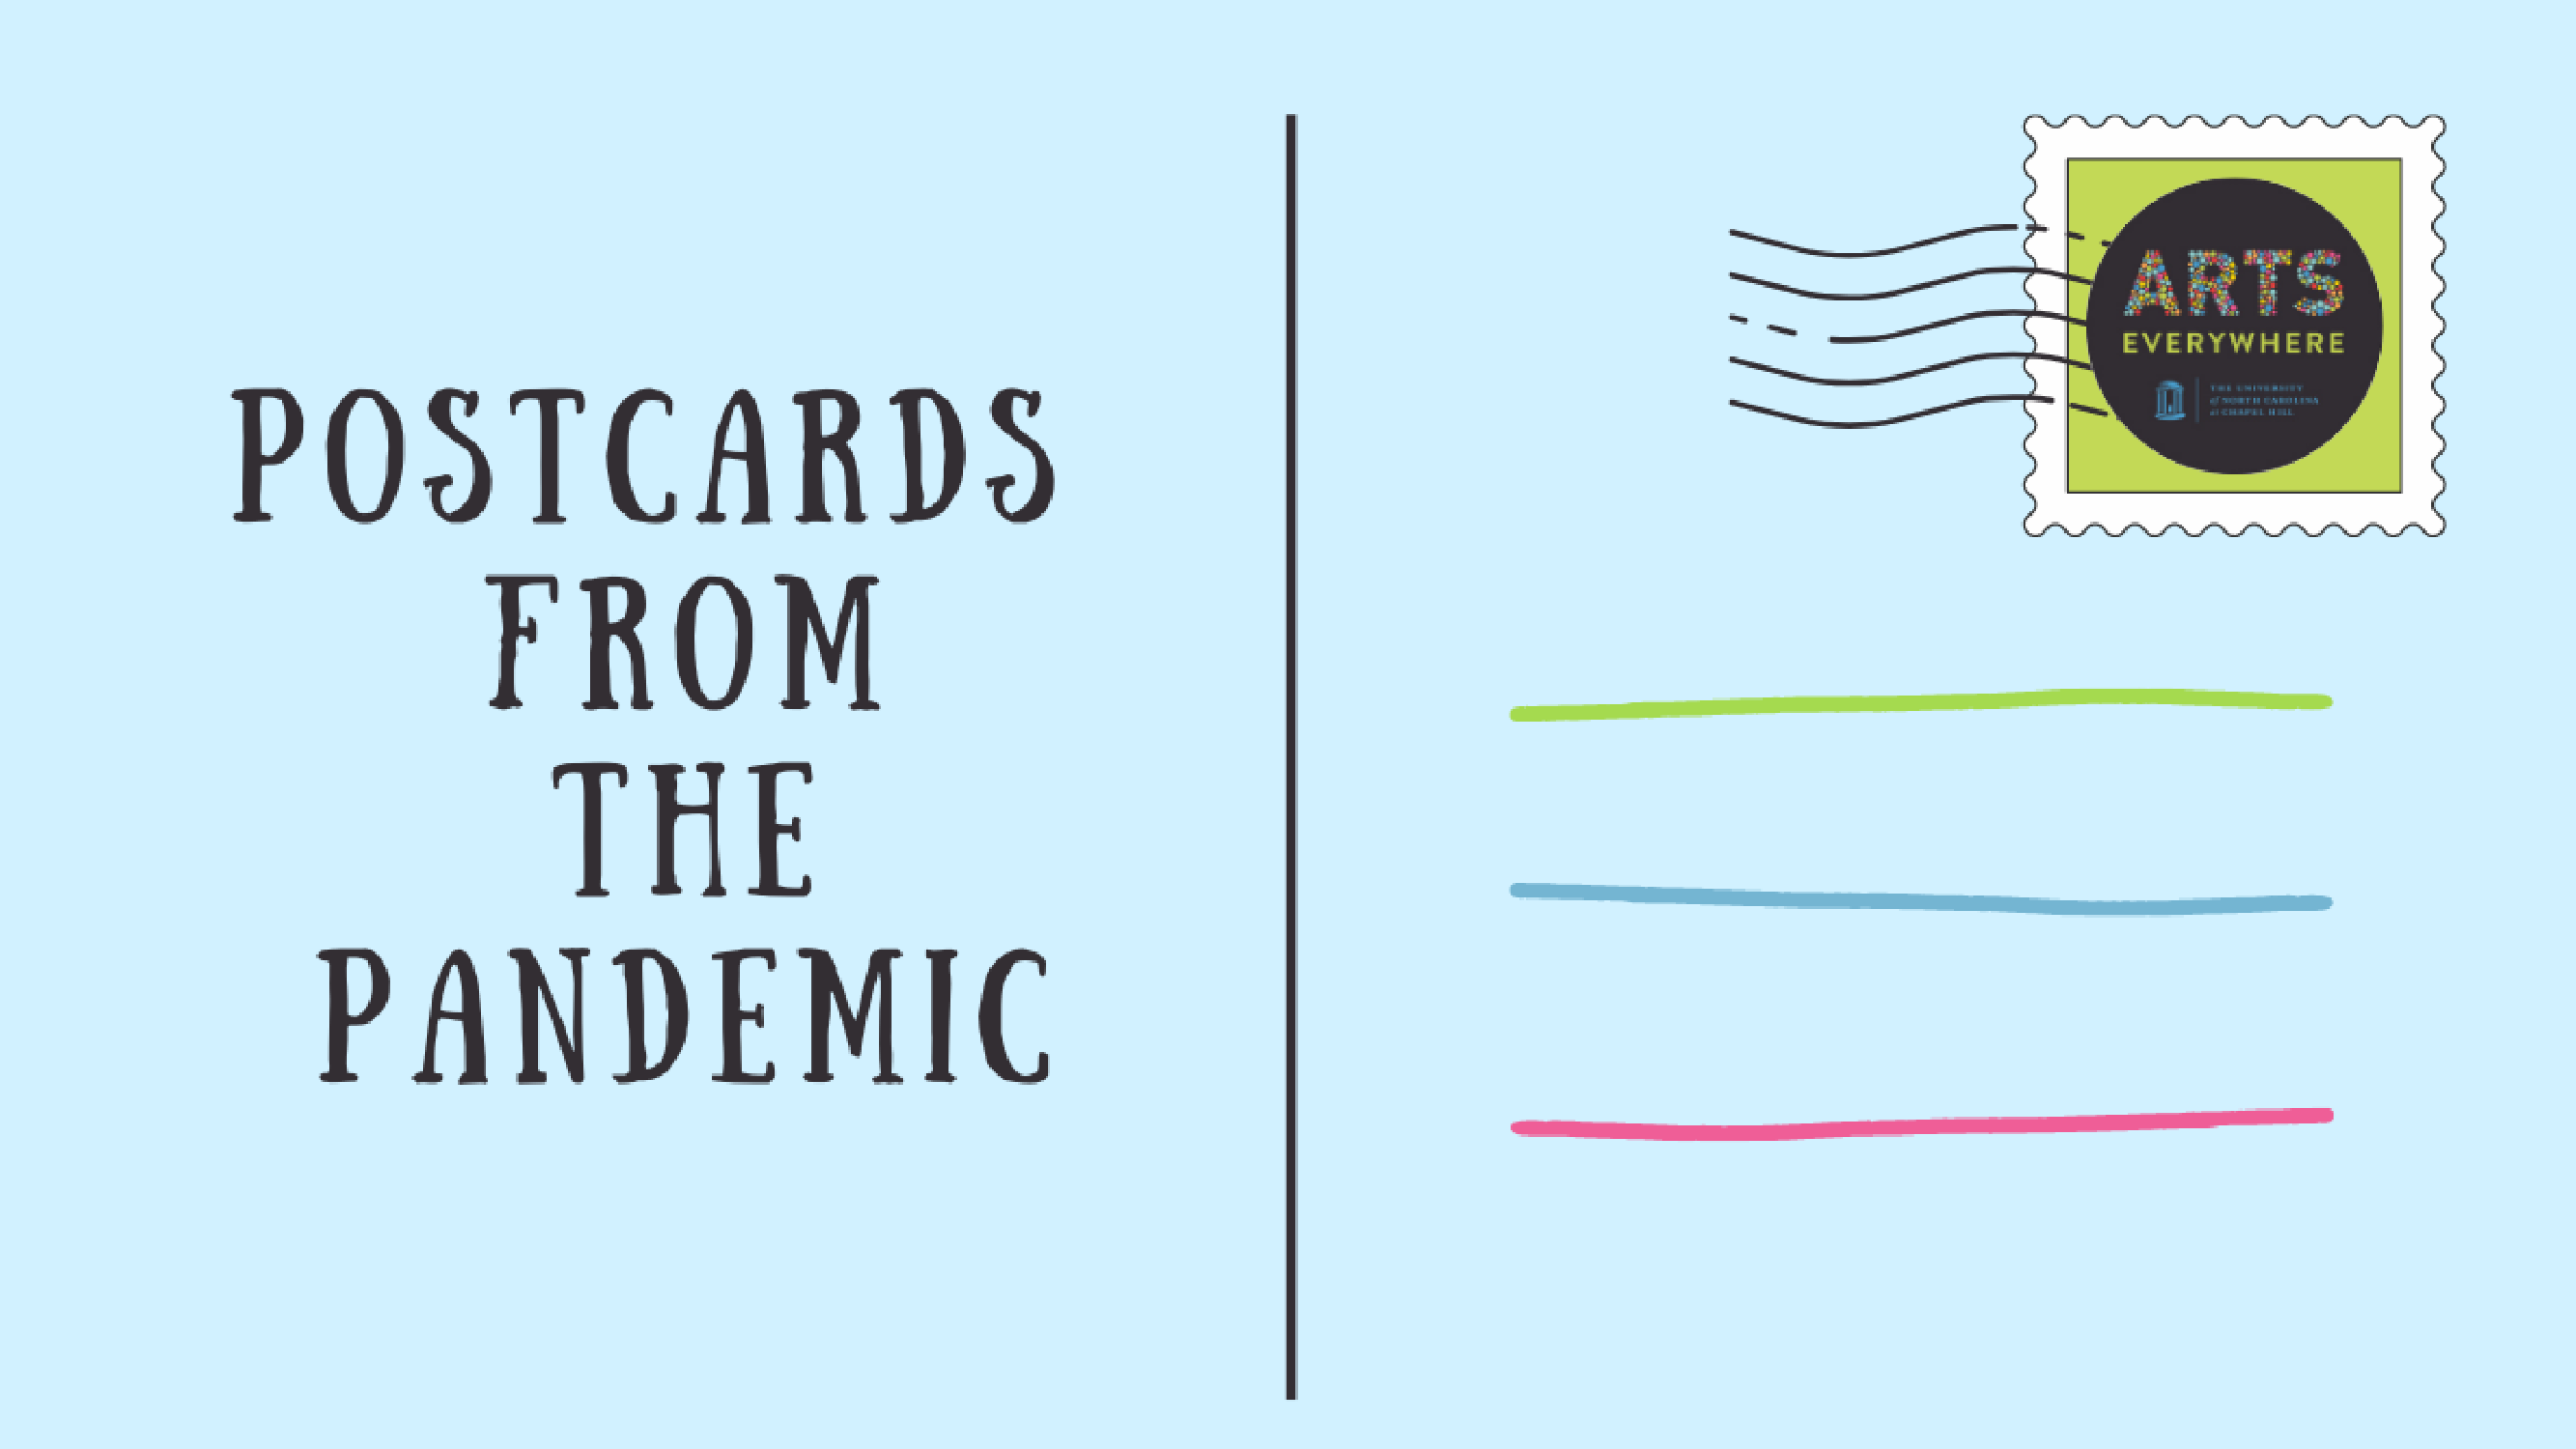 Library participates in University “Postcards from the Pandemic” project